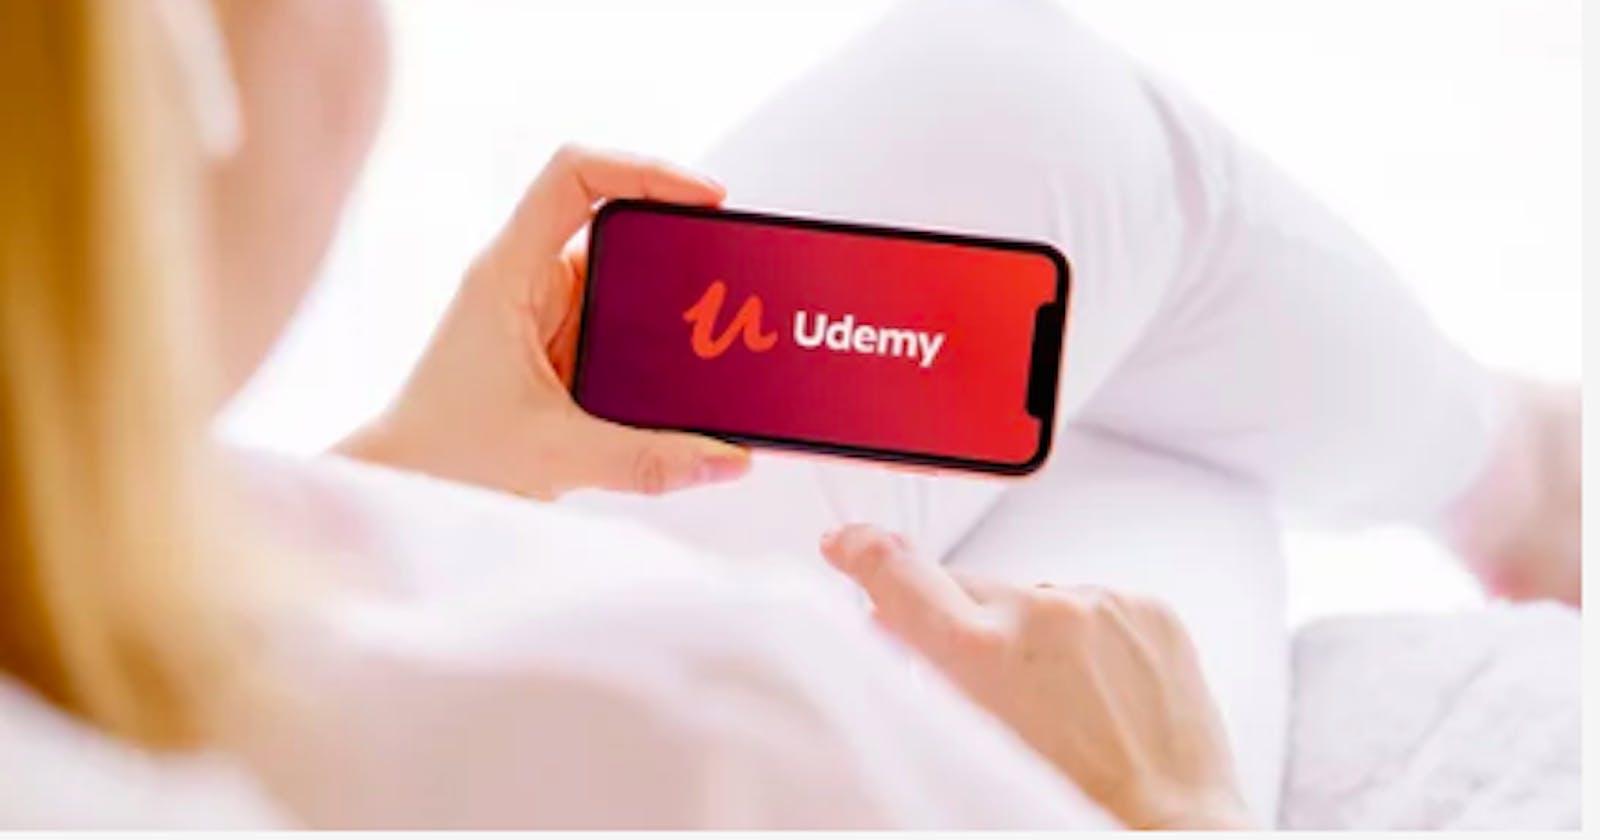 Learn Top 5 Programming Language At Udemy